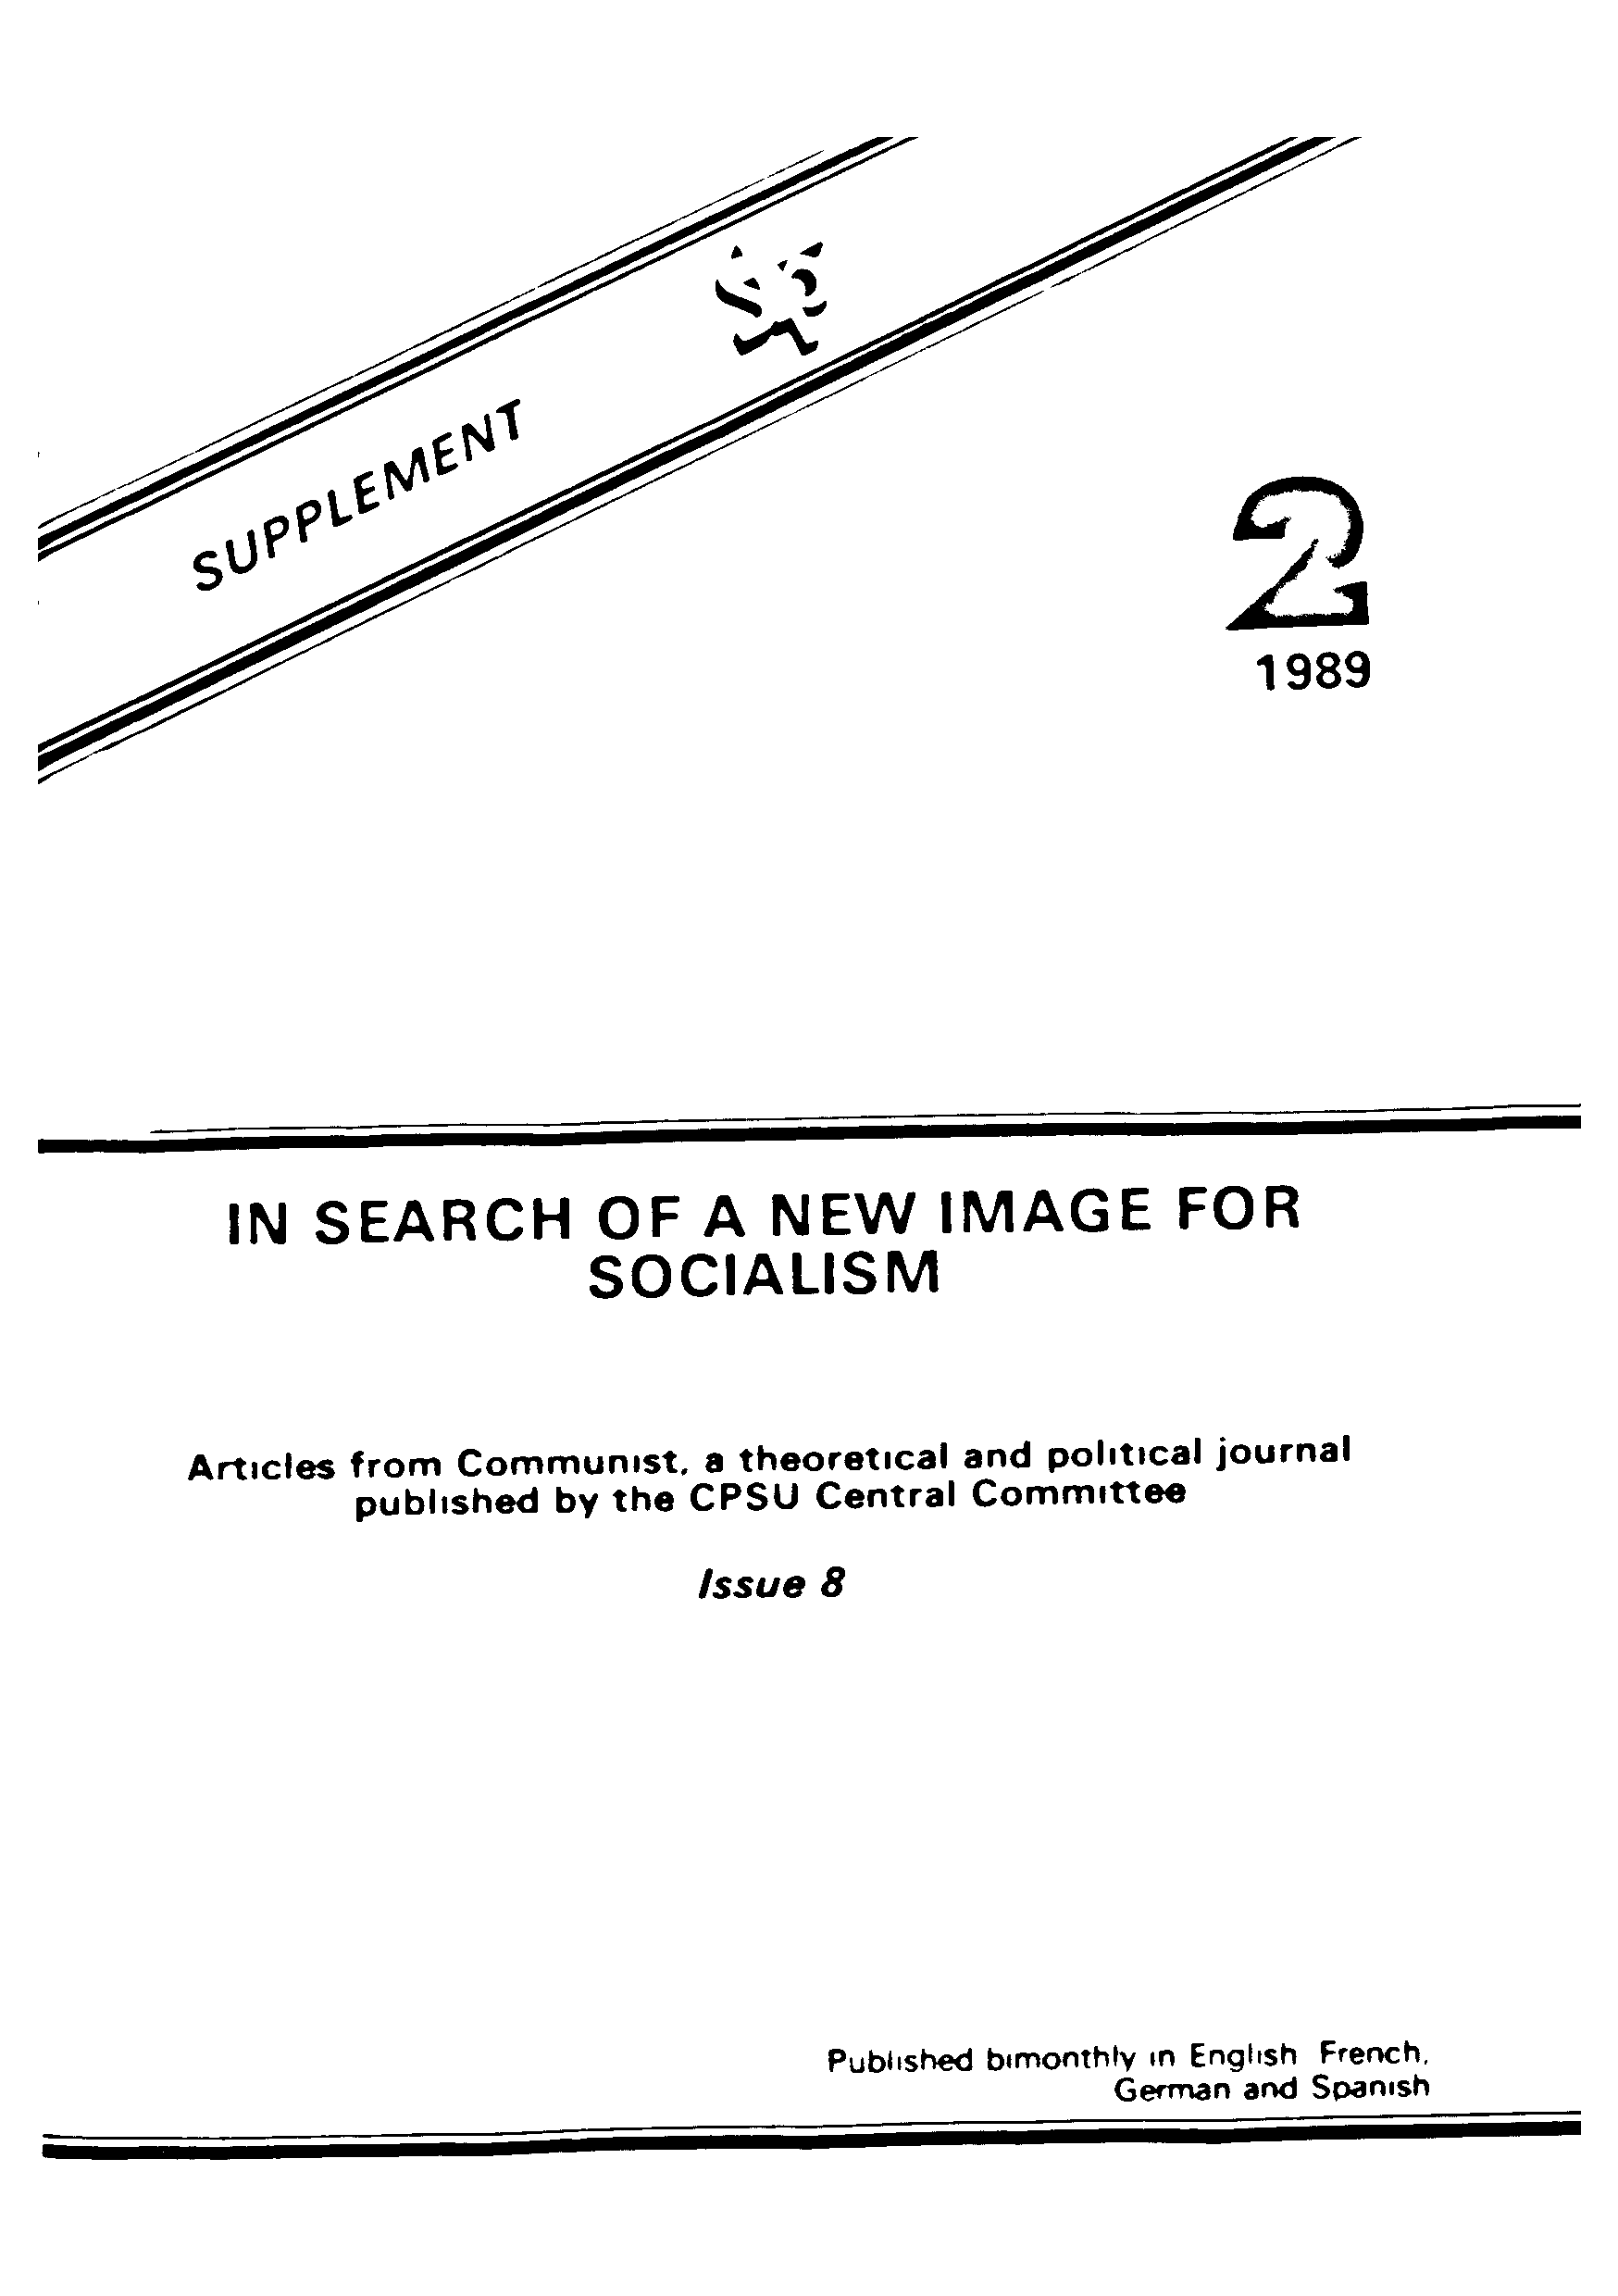 IN search of a new image for socialism (supplement 2 1989 issu-8)